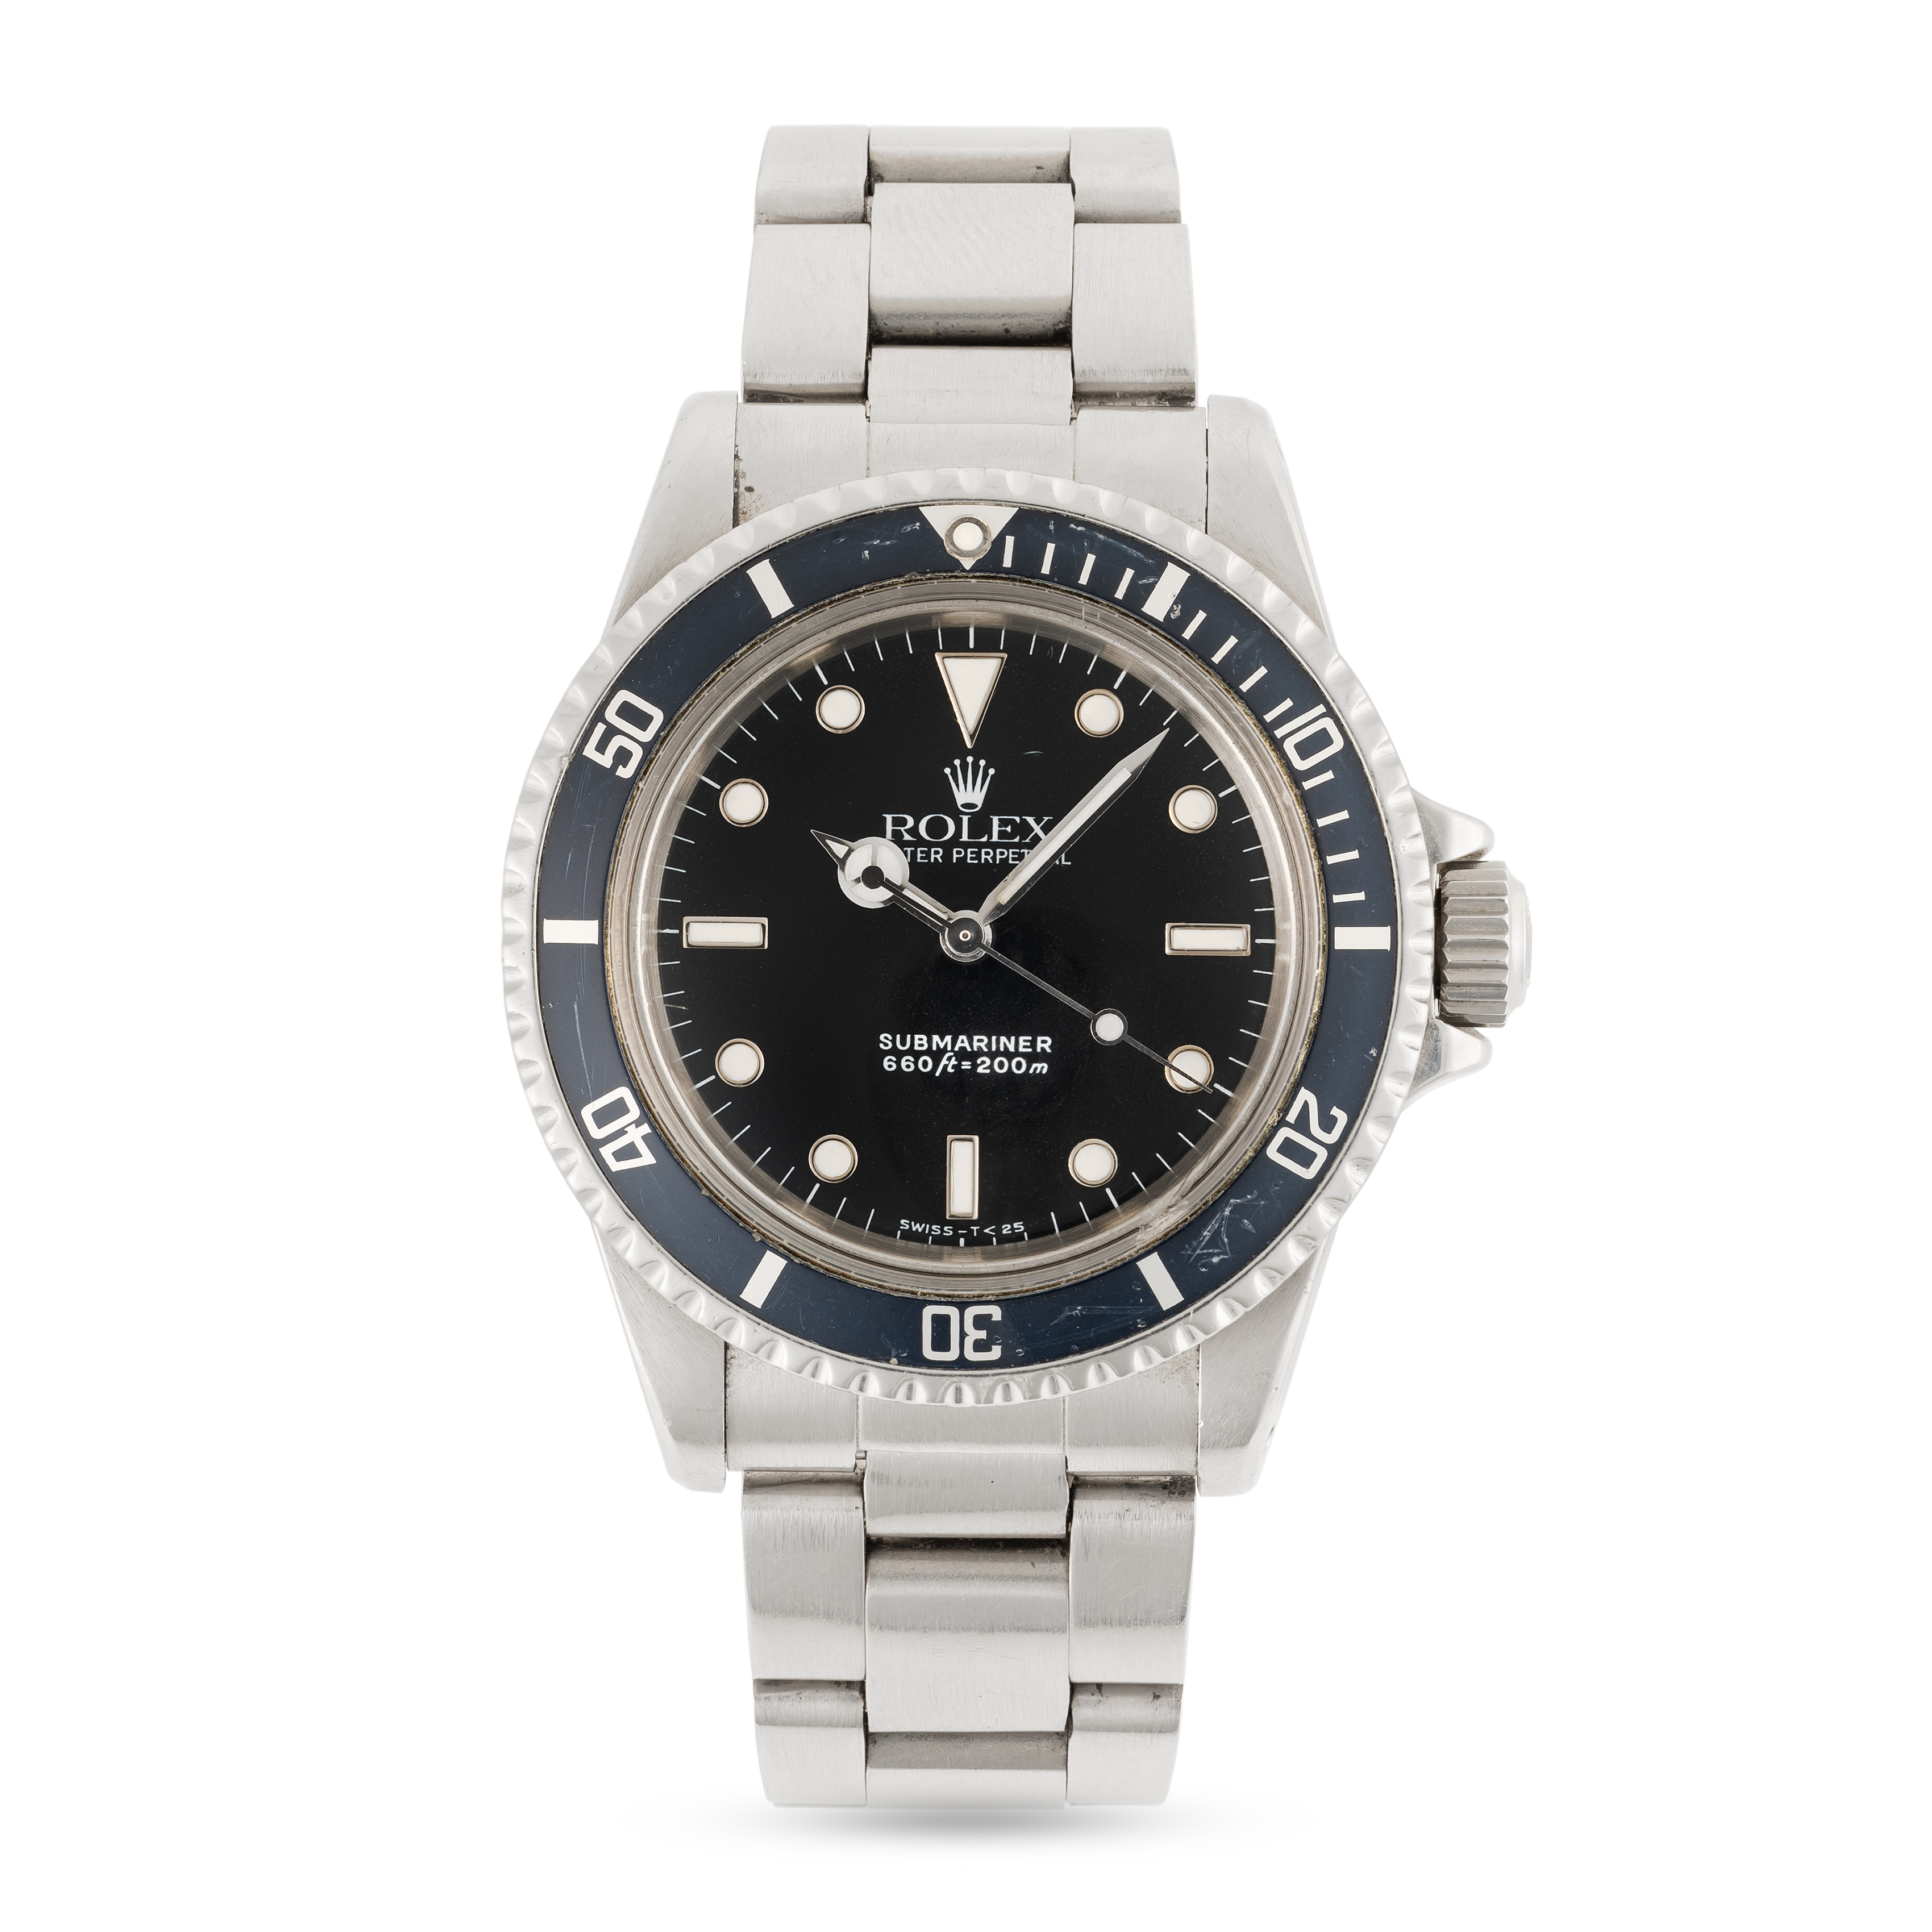 A GENTLEMAN'S SIZE STAINLESS STEEL ROLEX OYSTER PERPETUAL SUBMARINER WRIST WATCH CIRCA 1989, REF. - Image 2 of 10